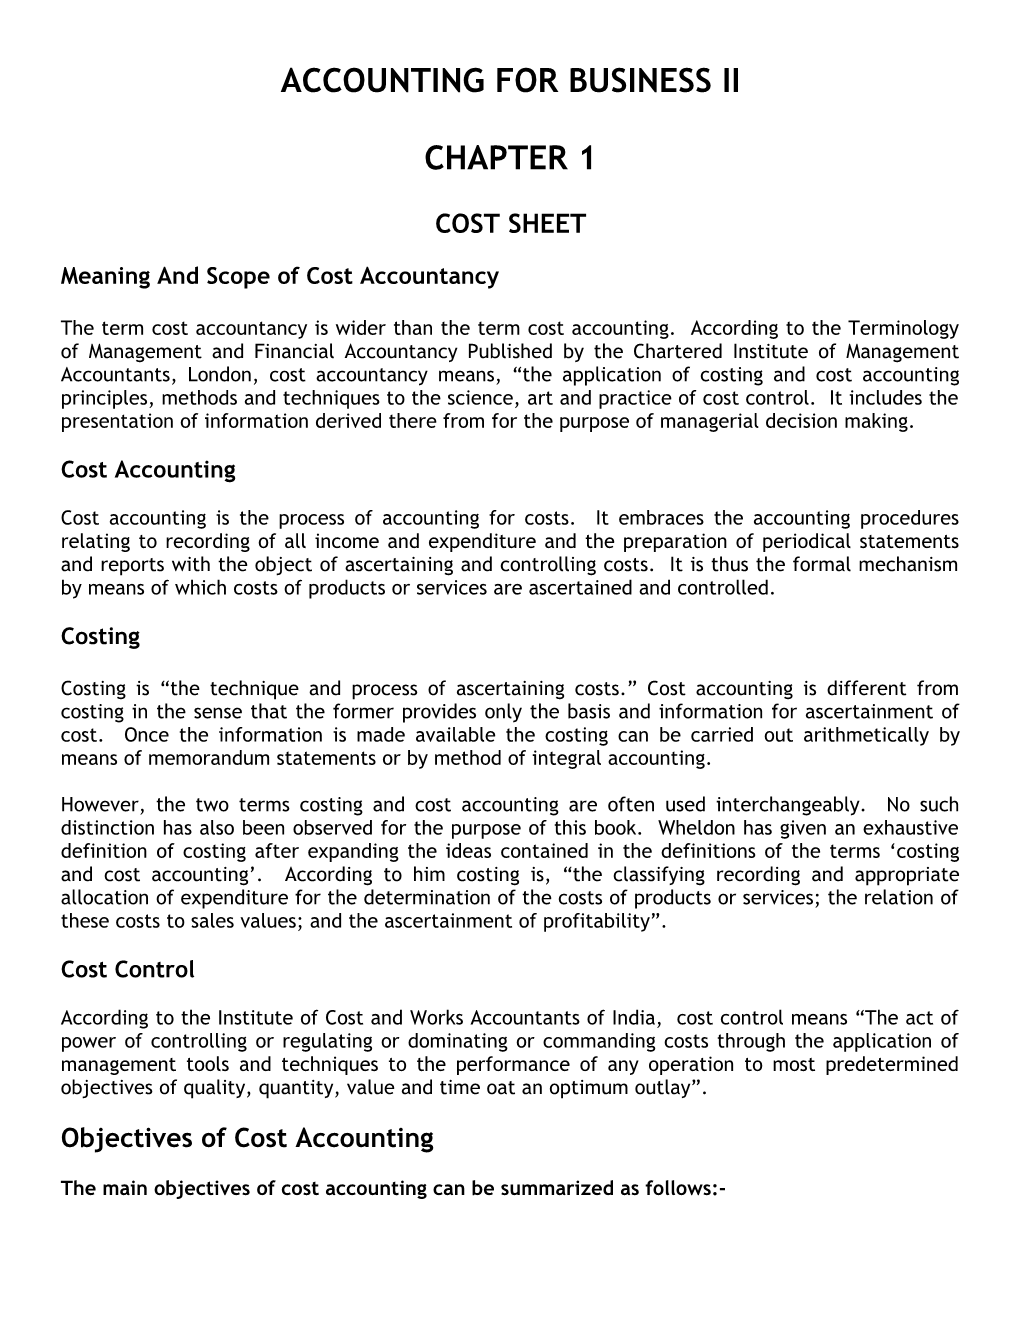 Meaning and Scope of Cost Accountancy